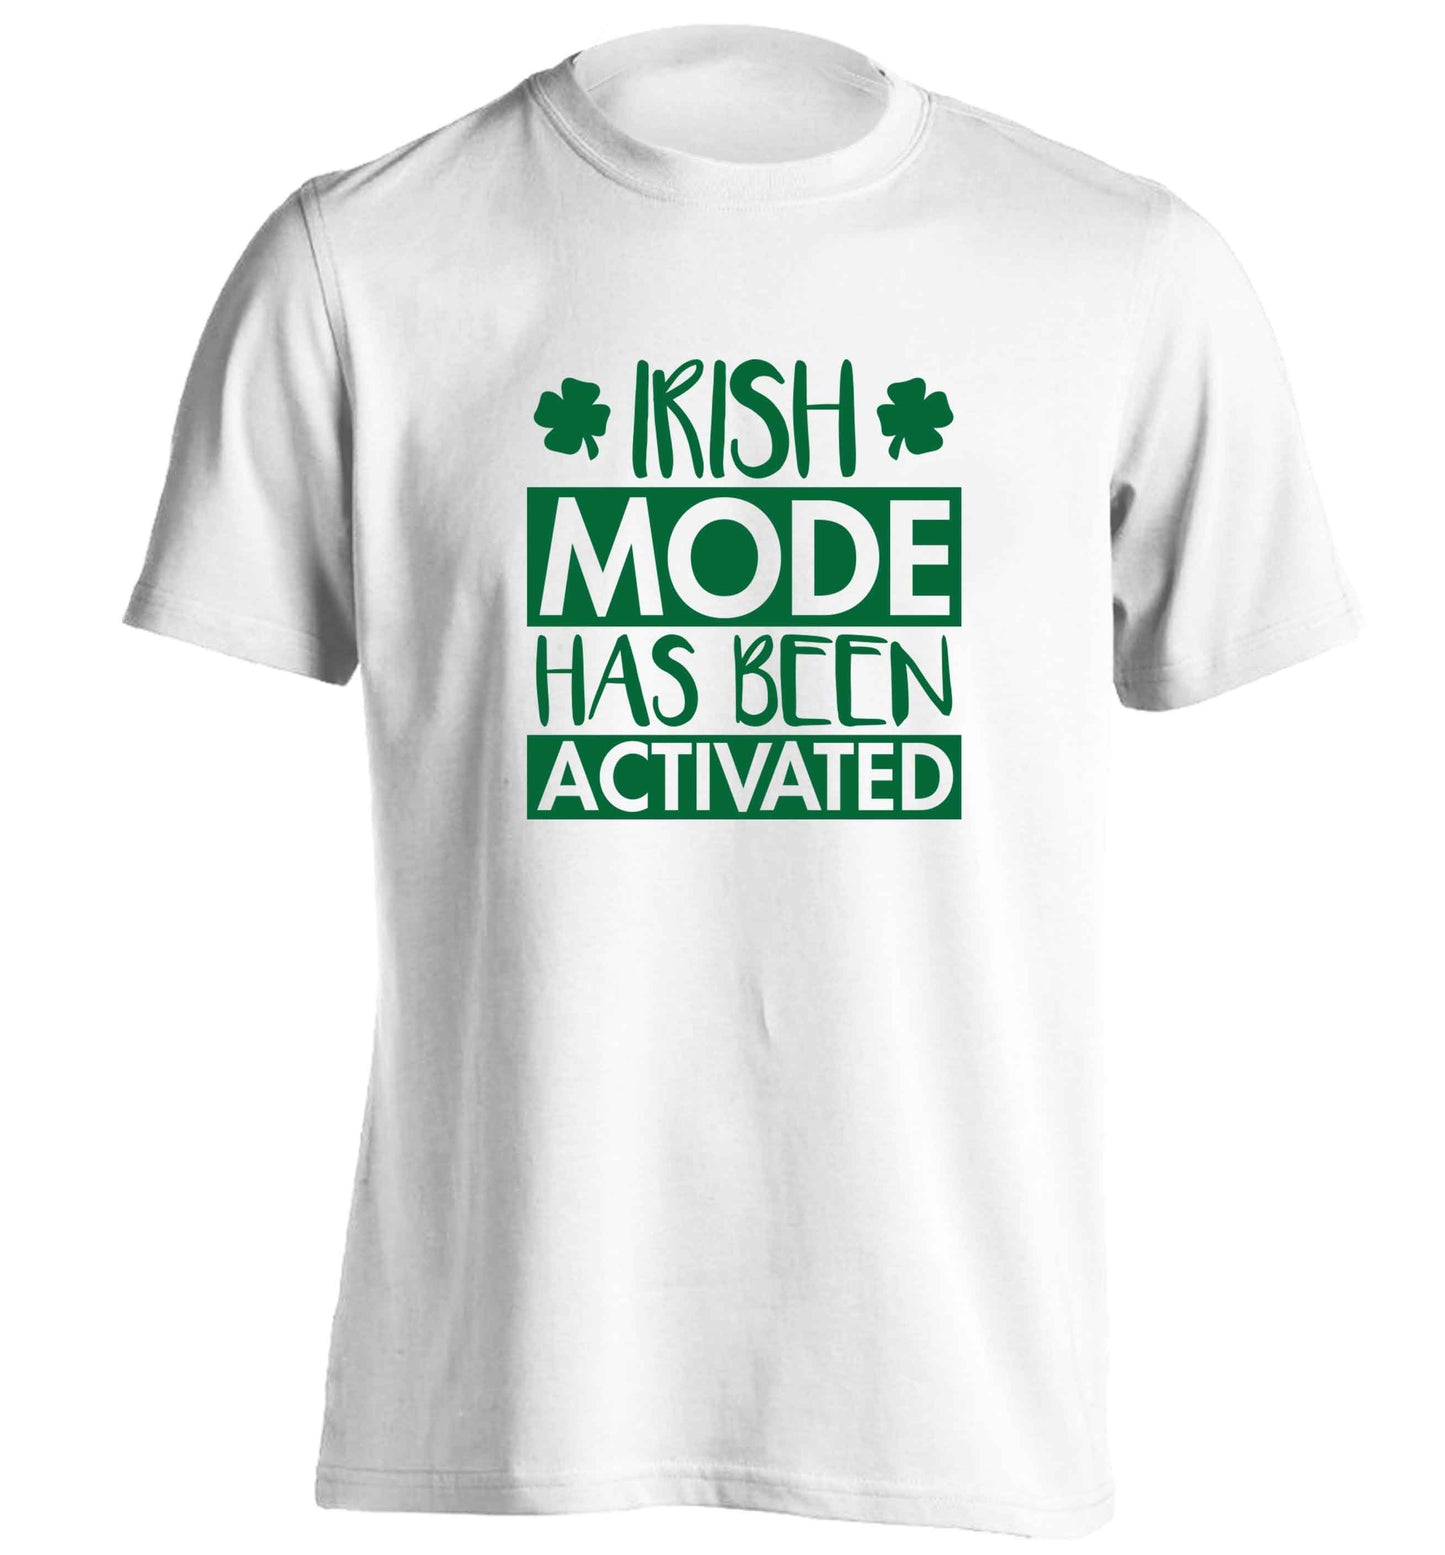 Irish mode has been activated adults unisex white Tshirt 2XL